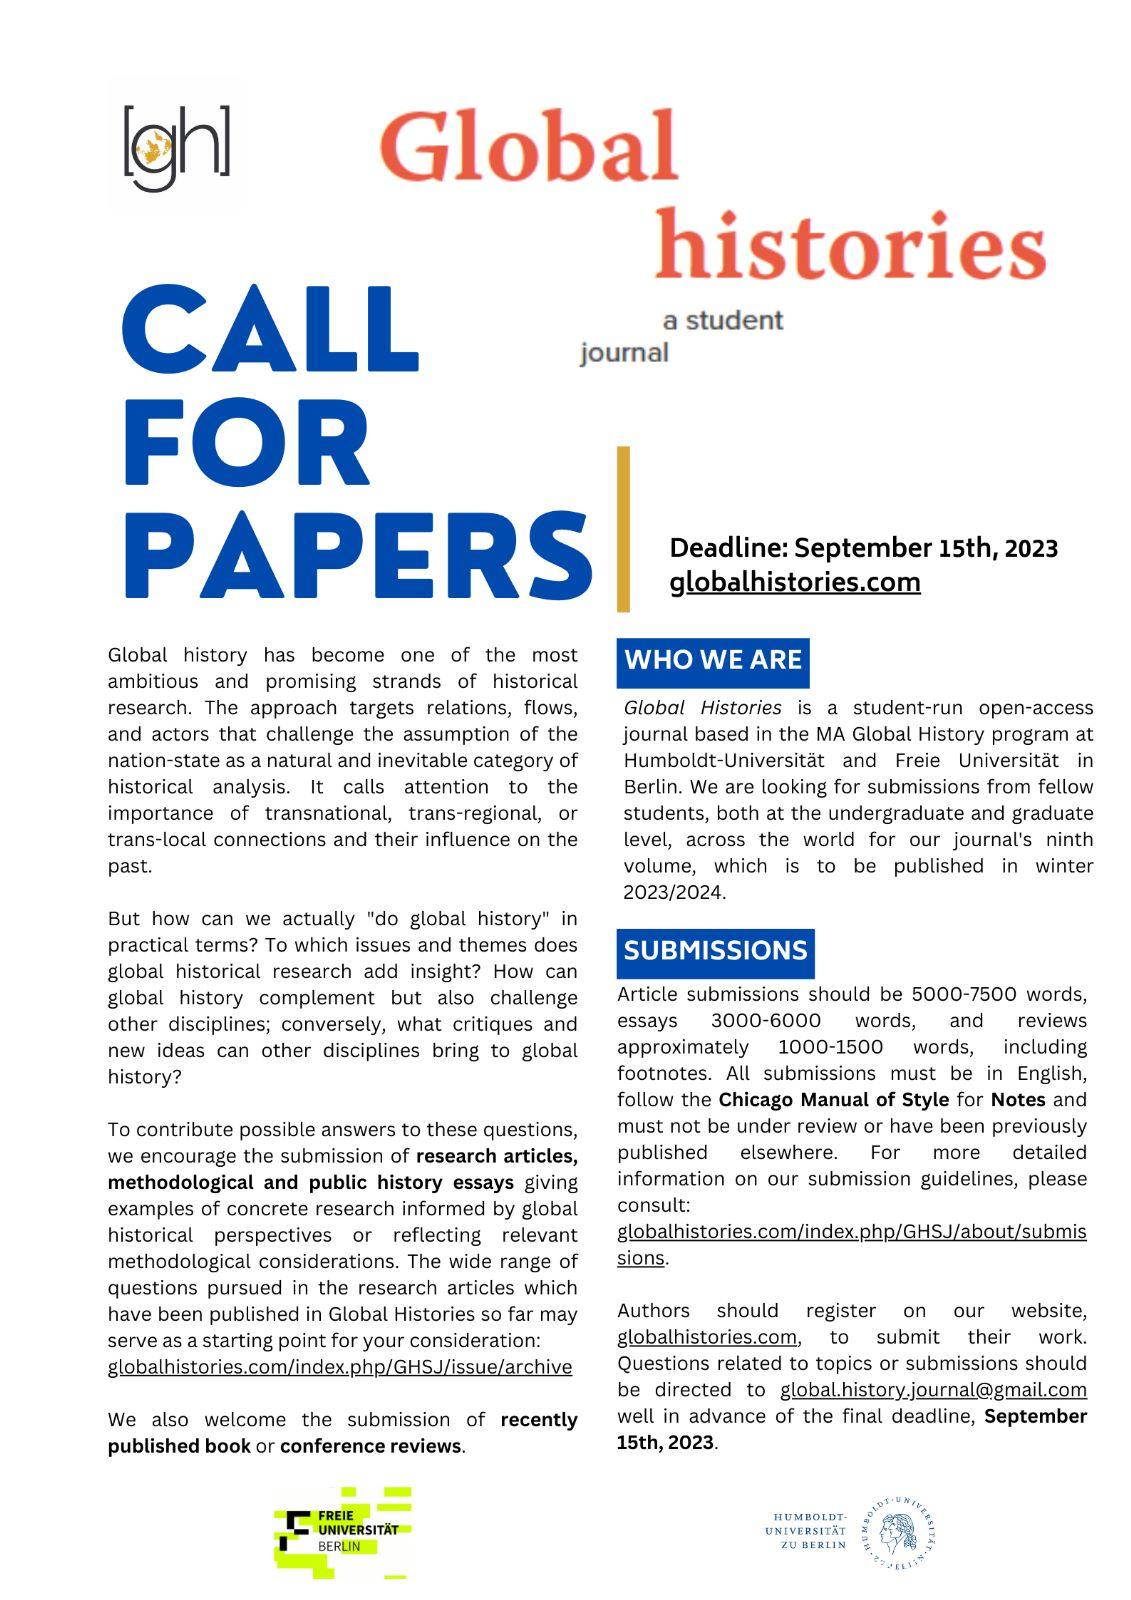 Call For Papers 9.2